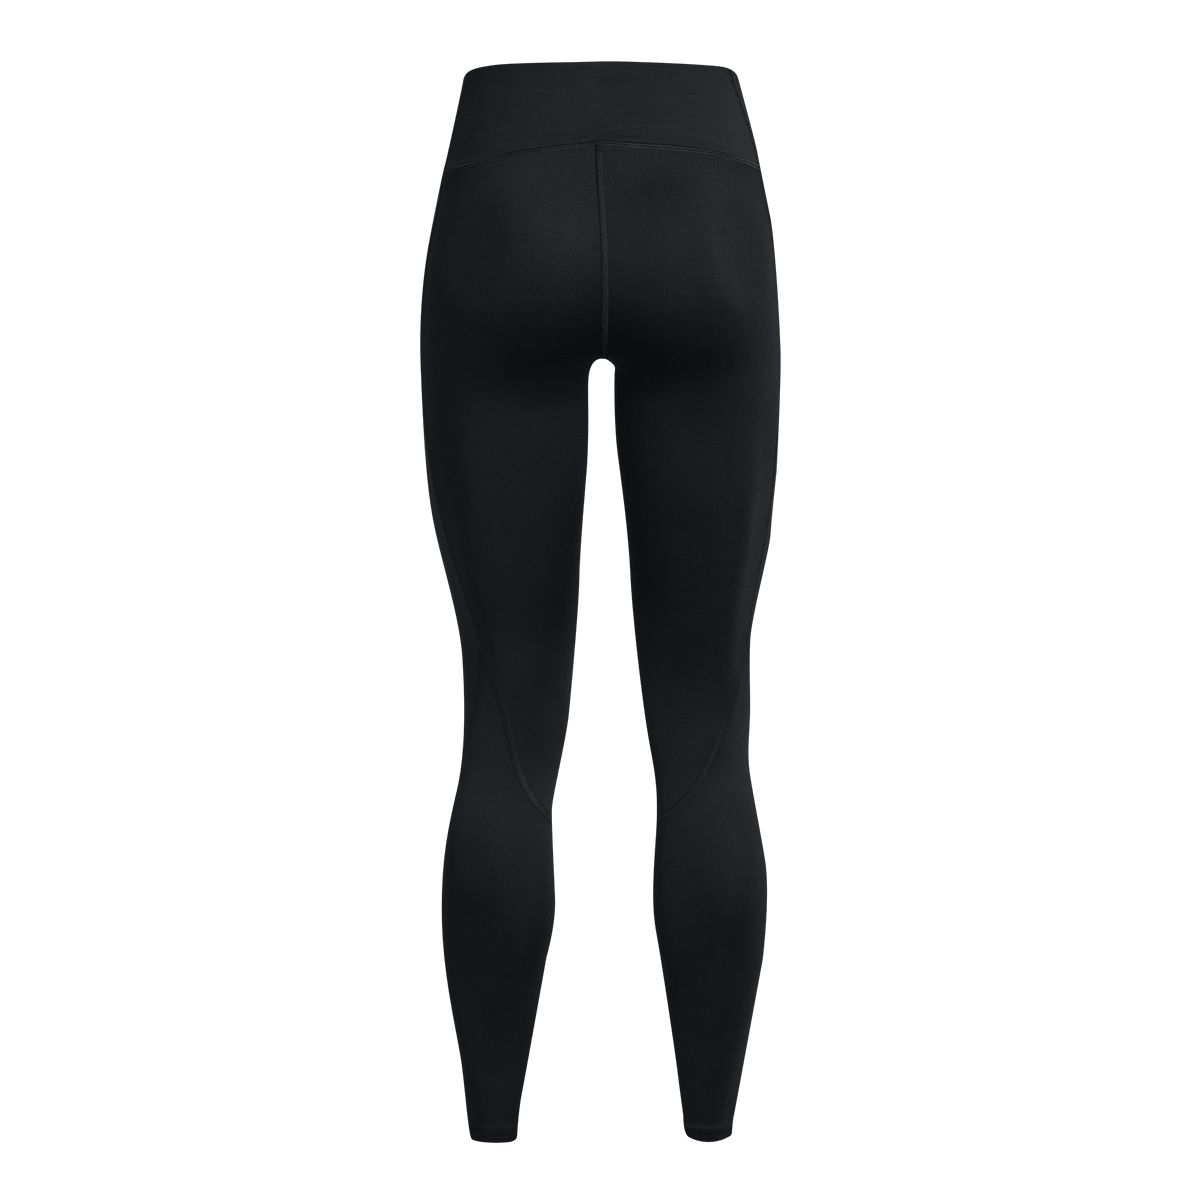 Under Armour Women's ColdGear® Infrared® Novelty Tights